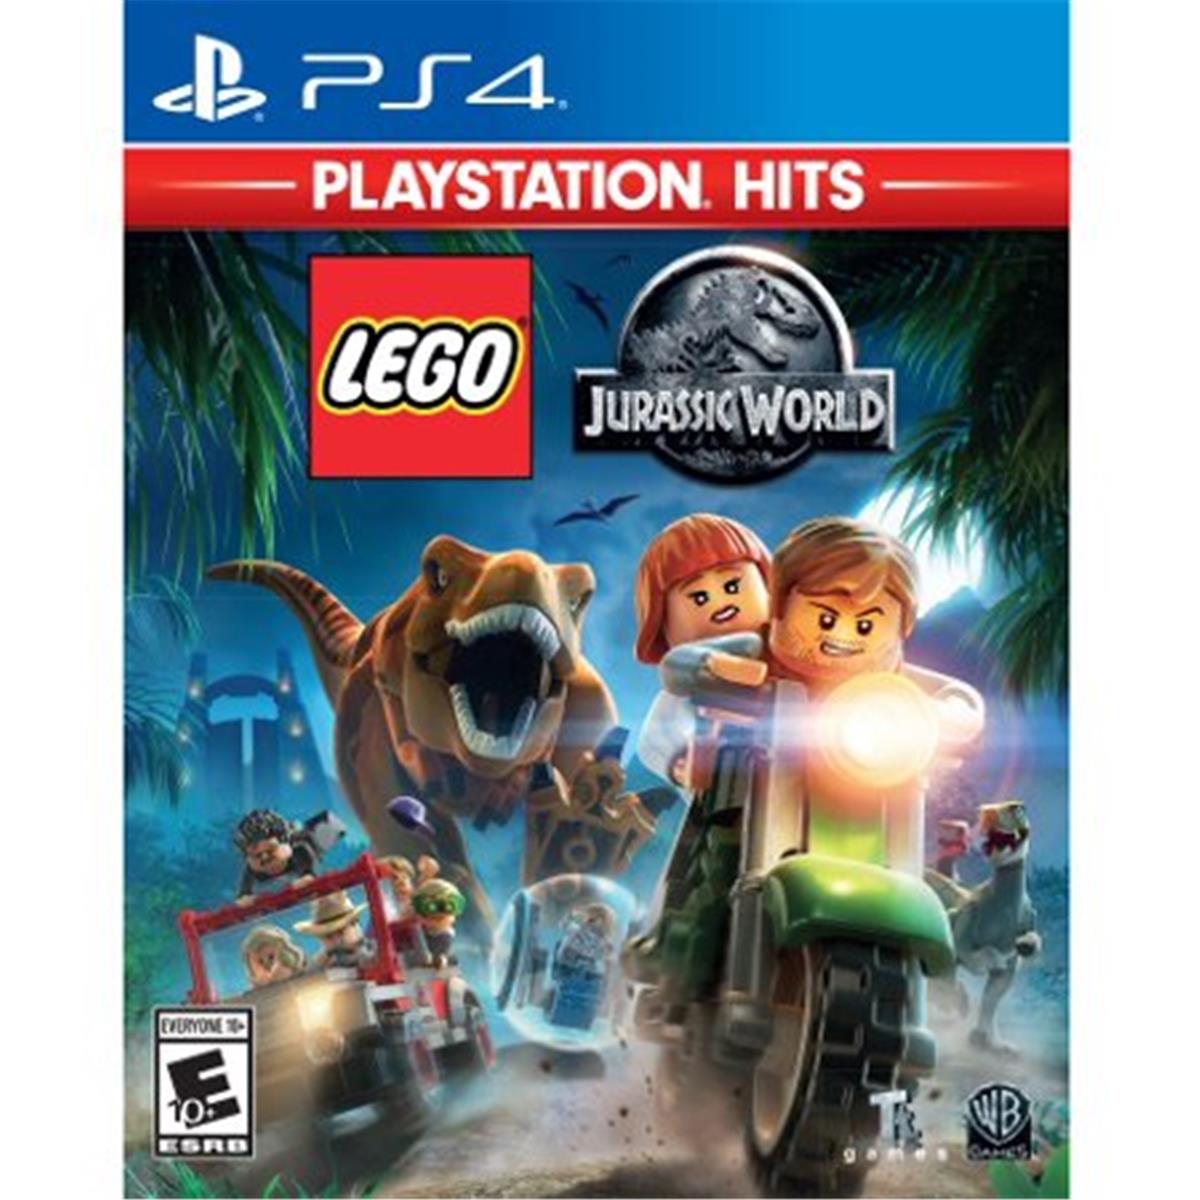 883929663972 Lego Jurassic World Play Station Hits Video Game